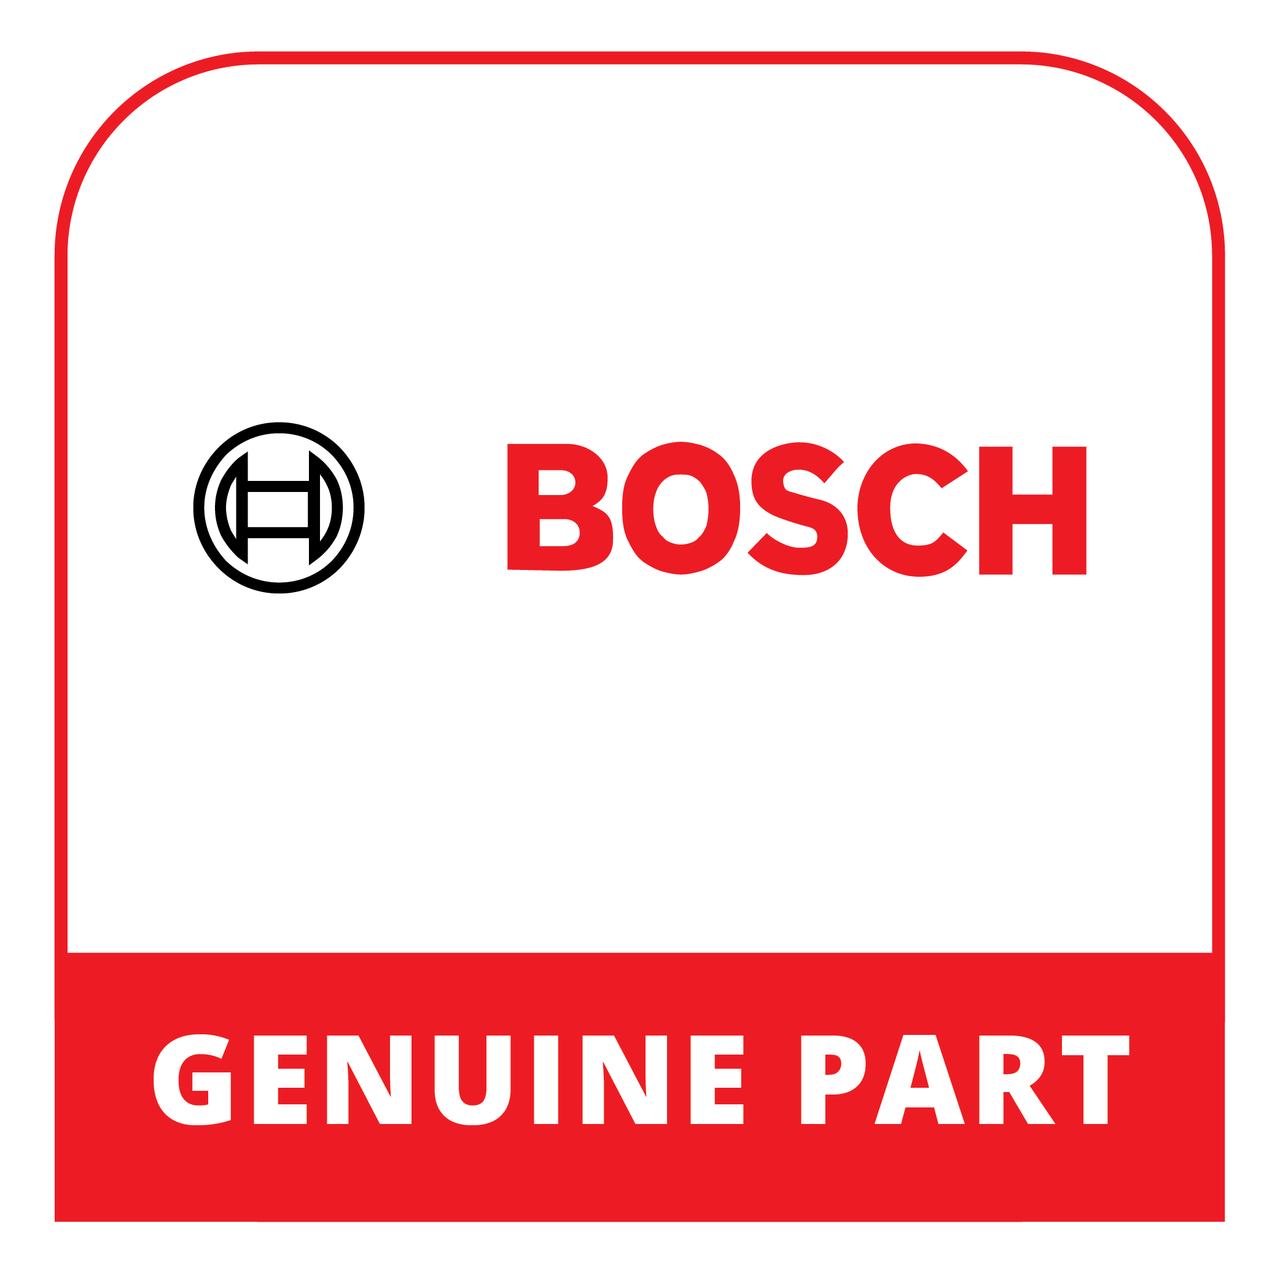 Bosch (Thermador) 10024571 - Housing - Genuine Bosch (Thermador) Part